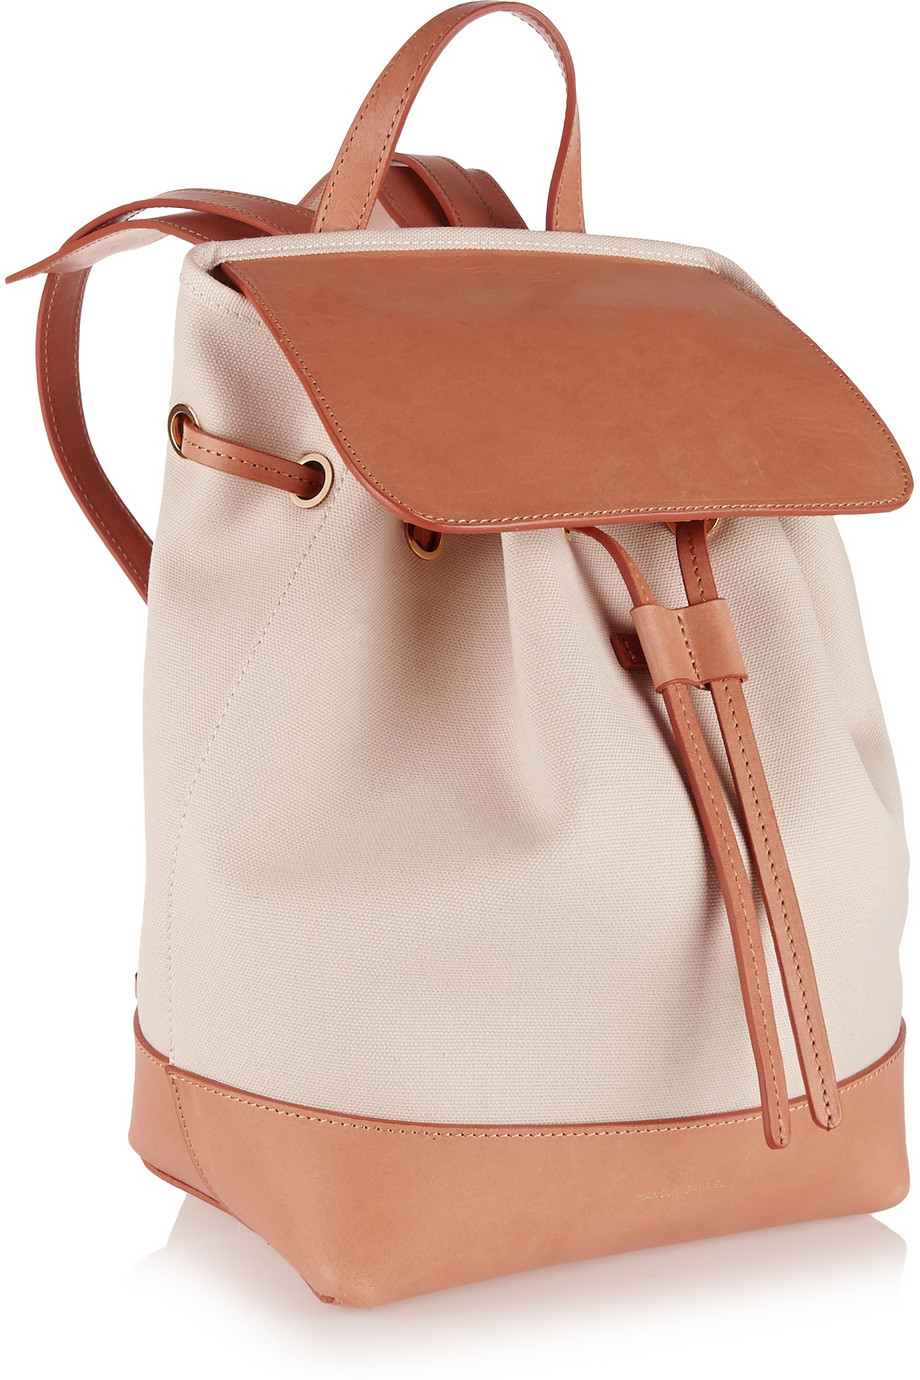 Lyst - Mansur Gavriel Mini Leather-Trimmed Canvas Backpack in White